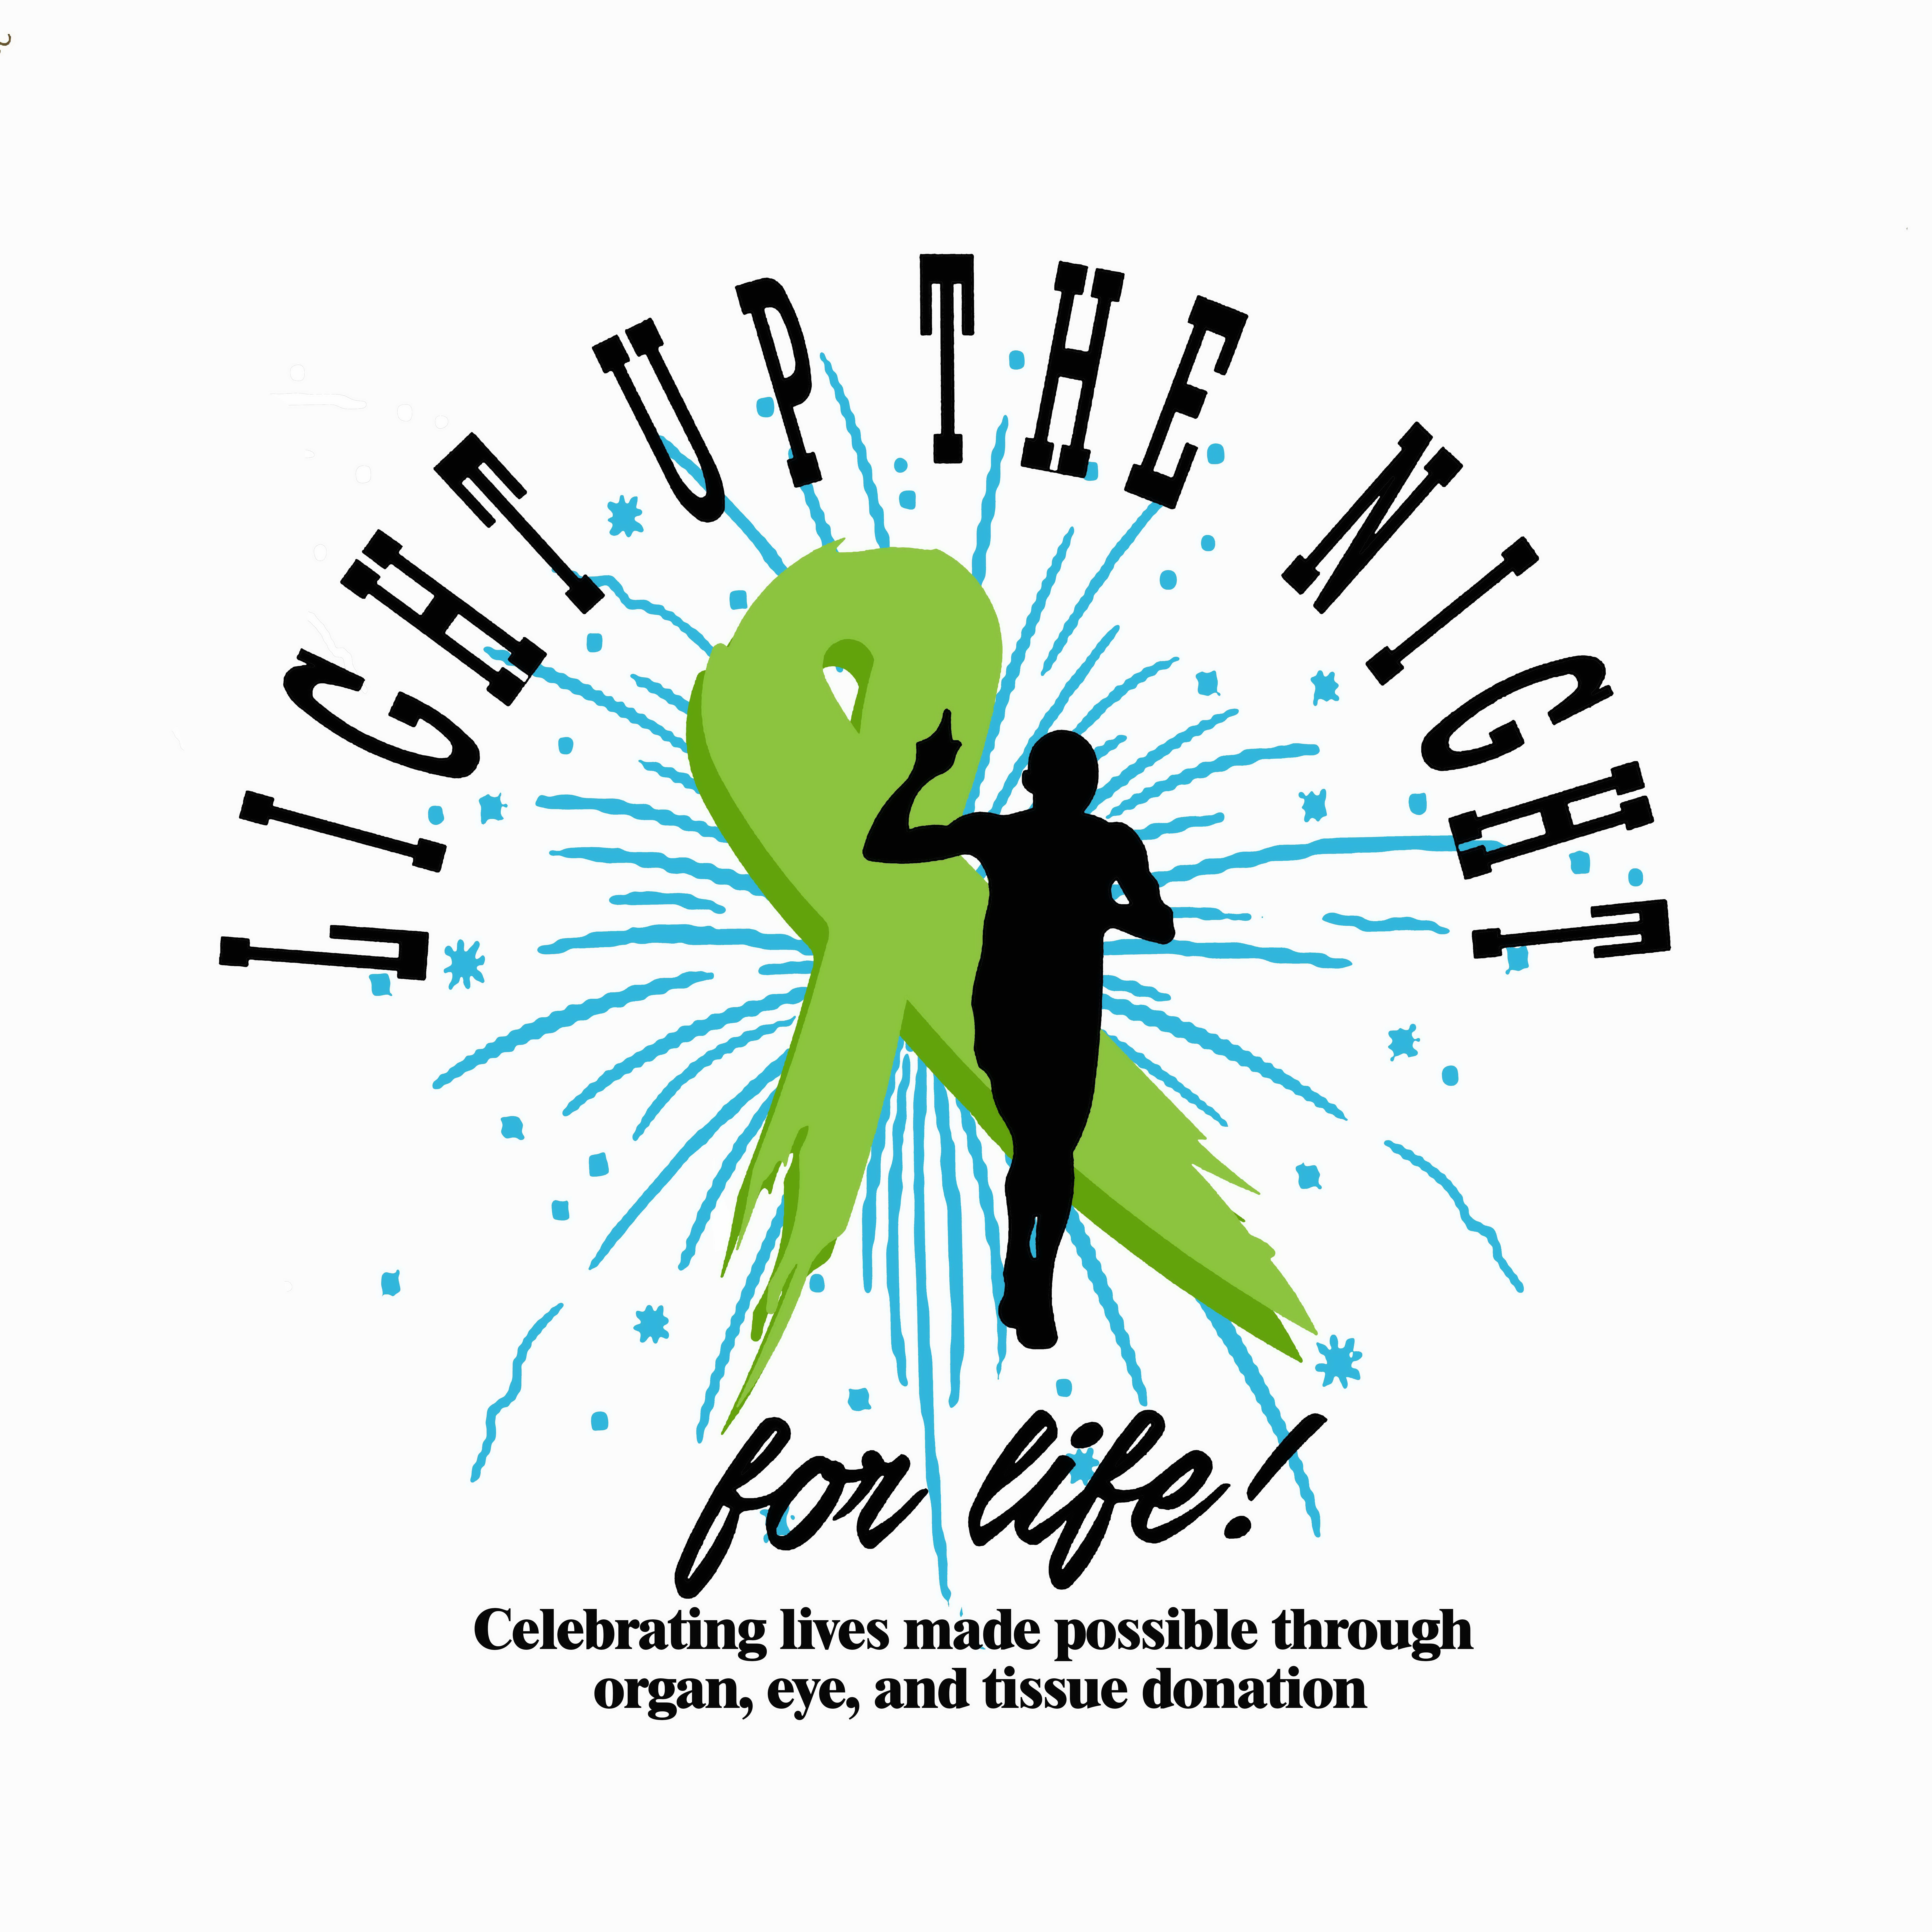 LIGHT UP THE NIGHT FOR LIFE; CELEBRATING LIVES MADE POSSIBLE THROUGH ORGAN, EYE AND TISSUE DONATION